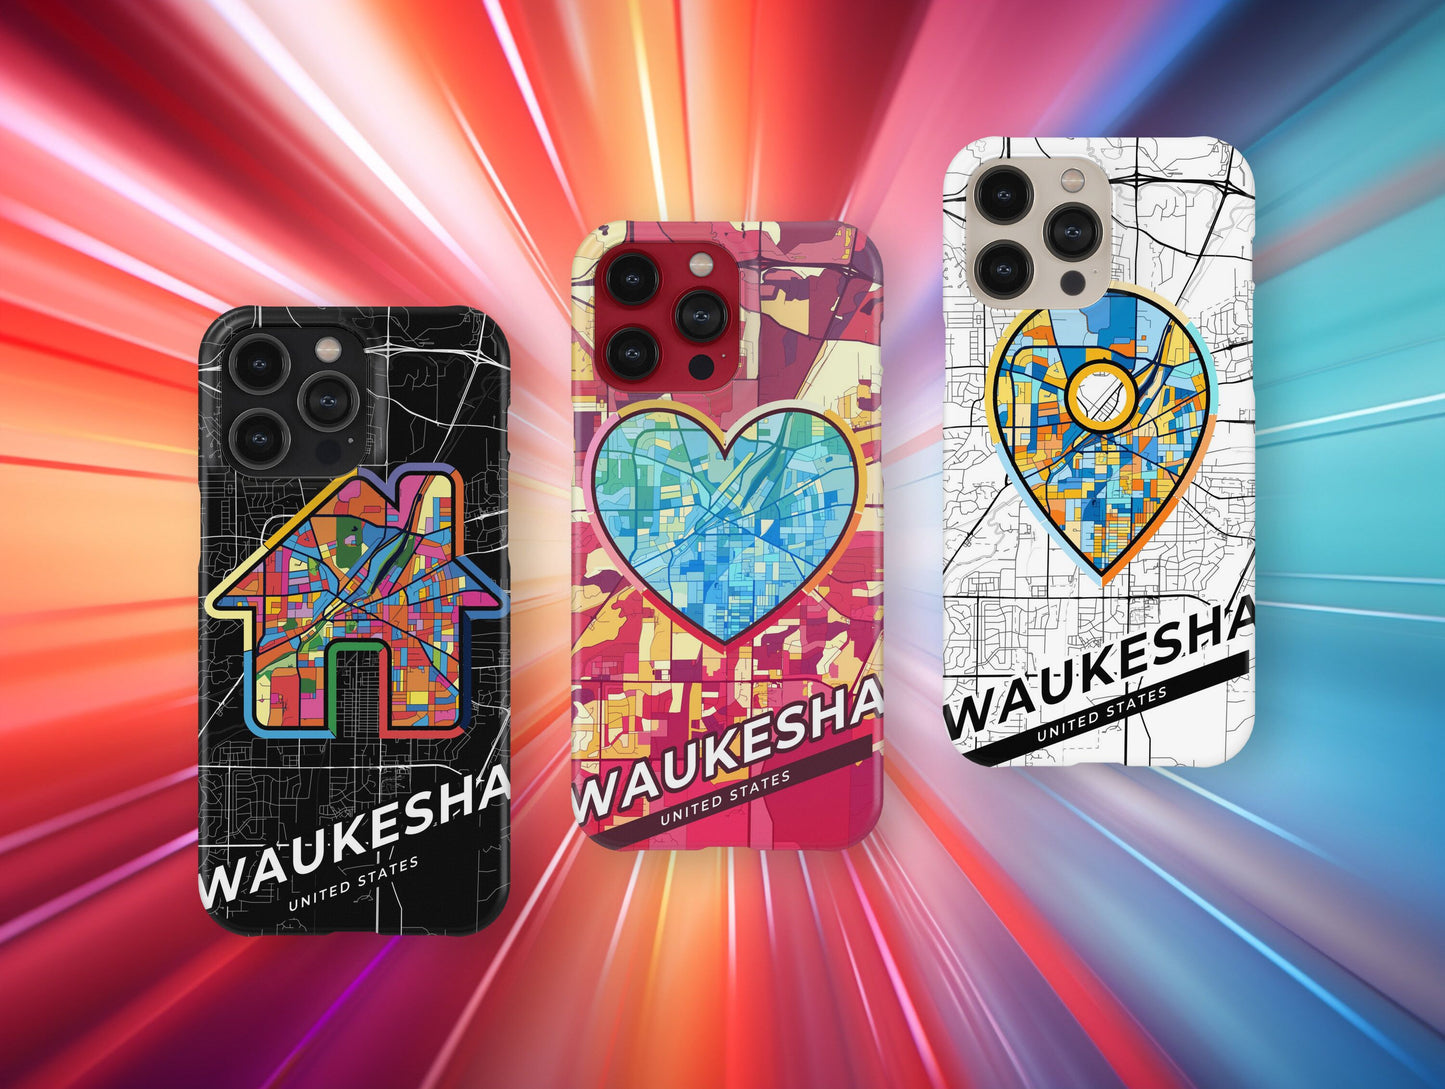 Waukesha Wisconsin slim phone case with colorful icon